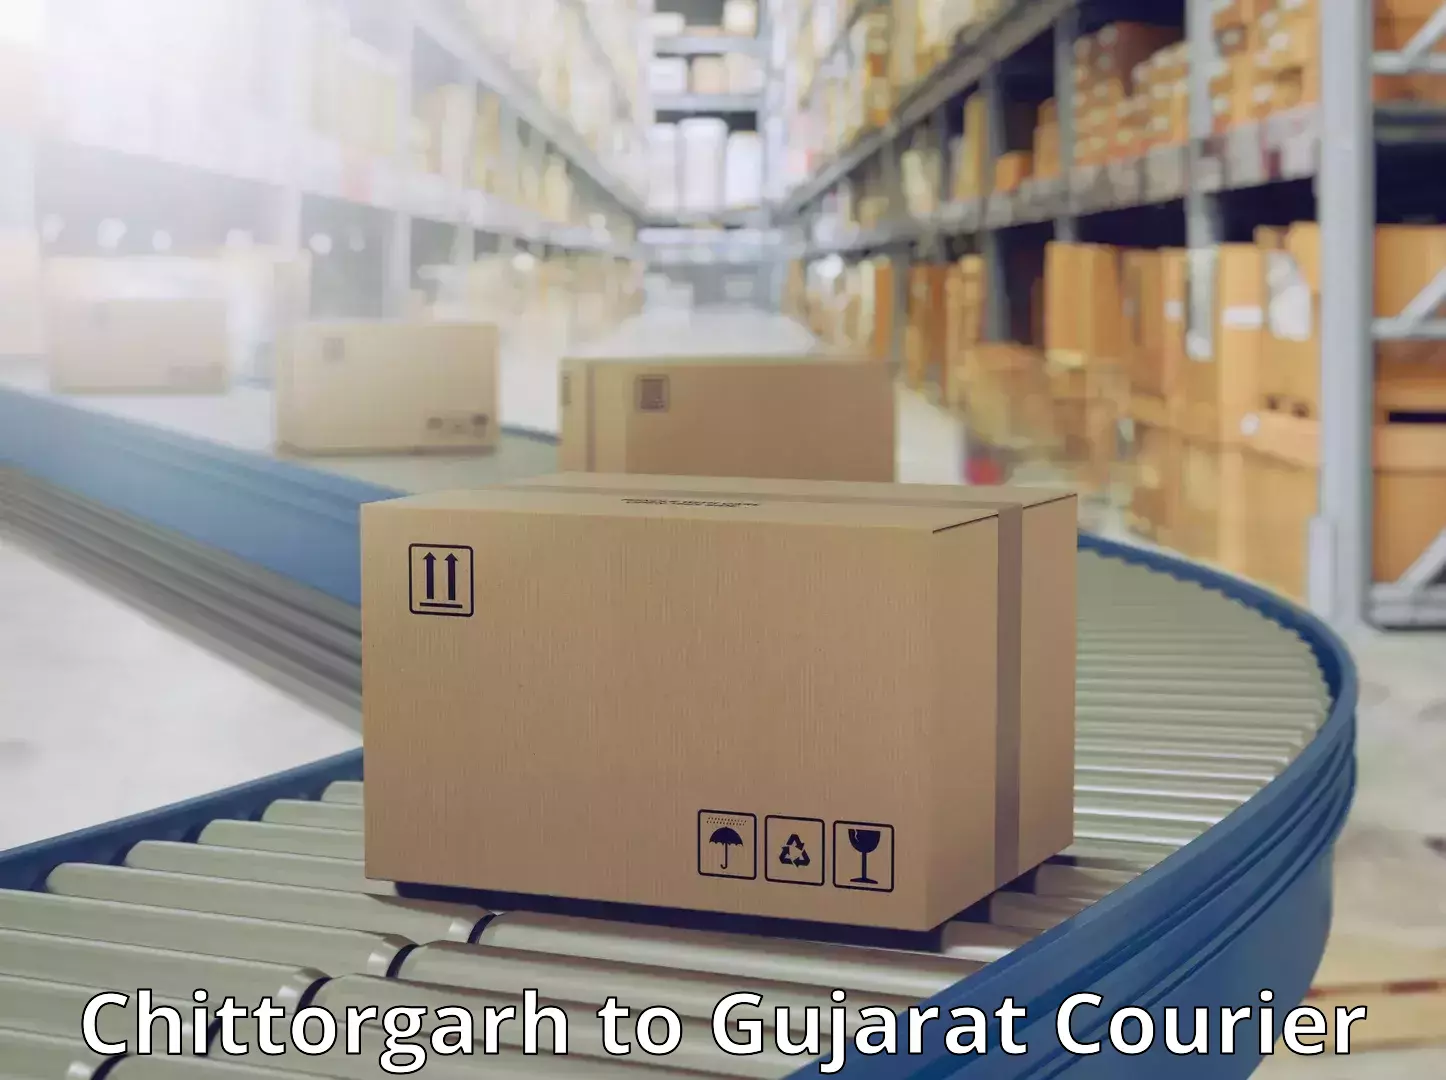 Multi-national courier services Chittorgarh to Ahmedabad